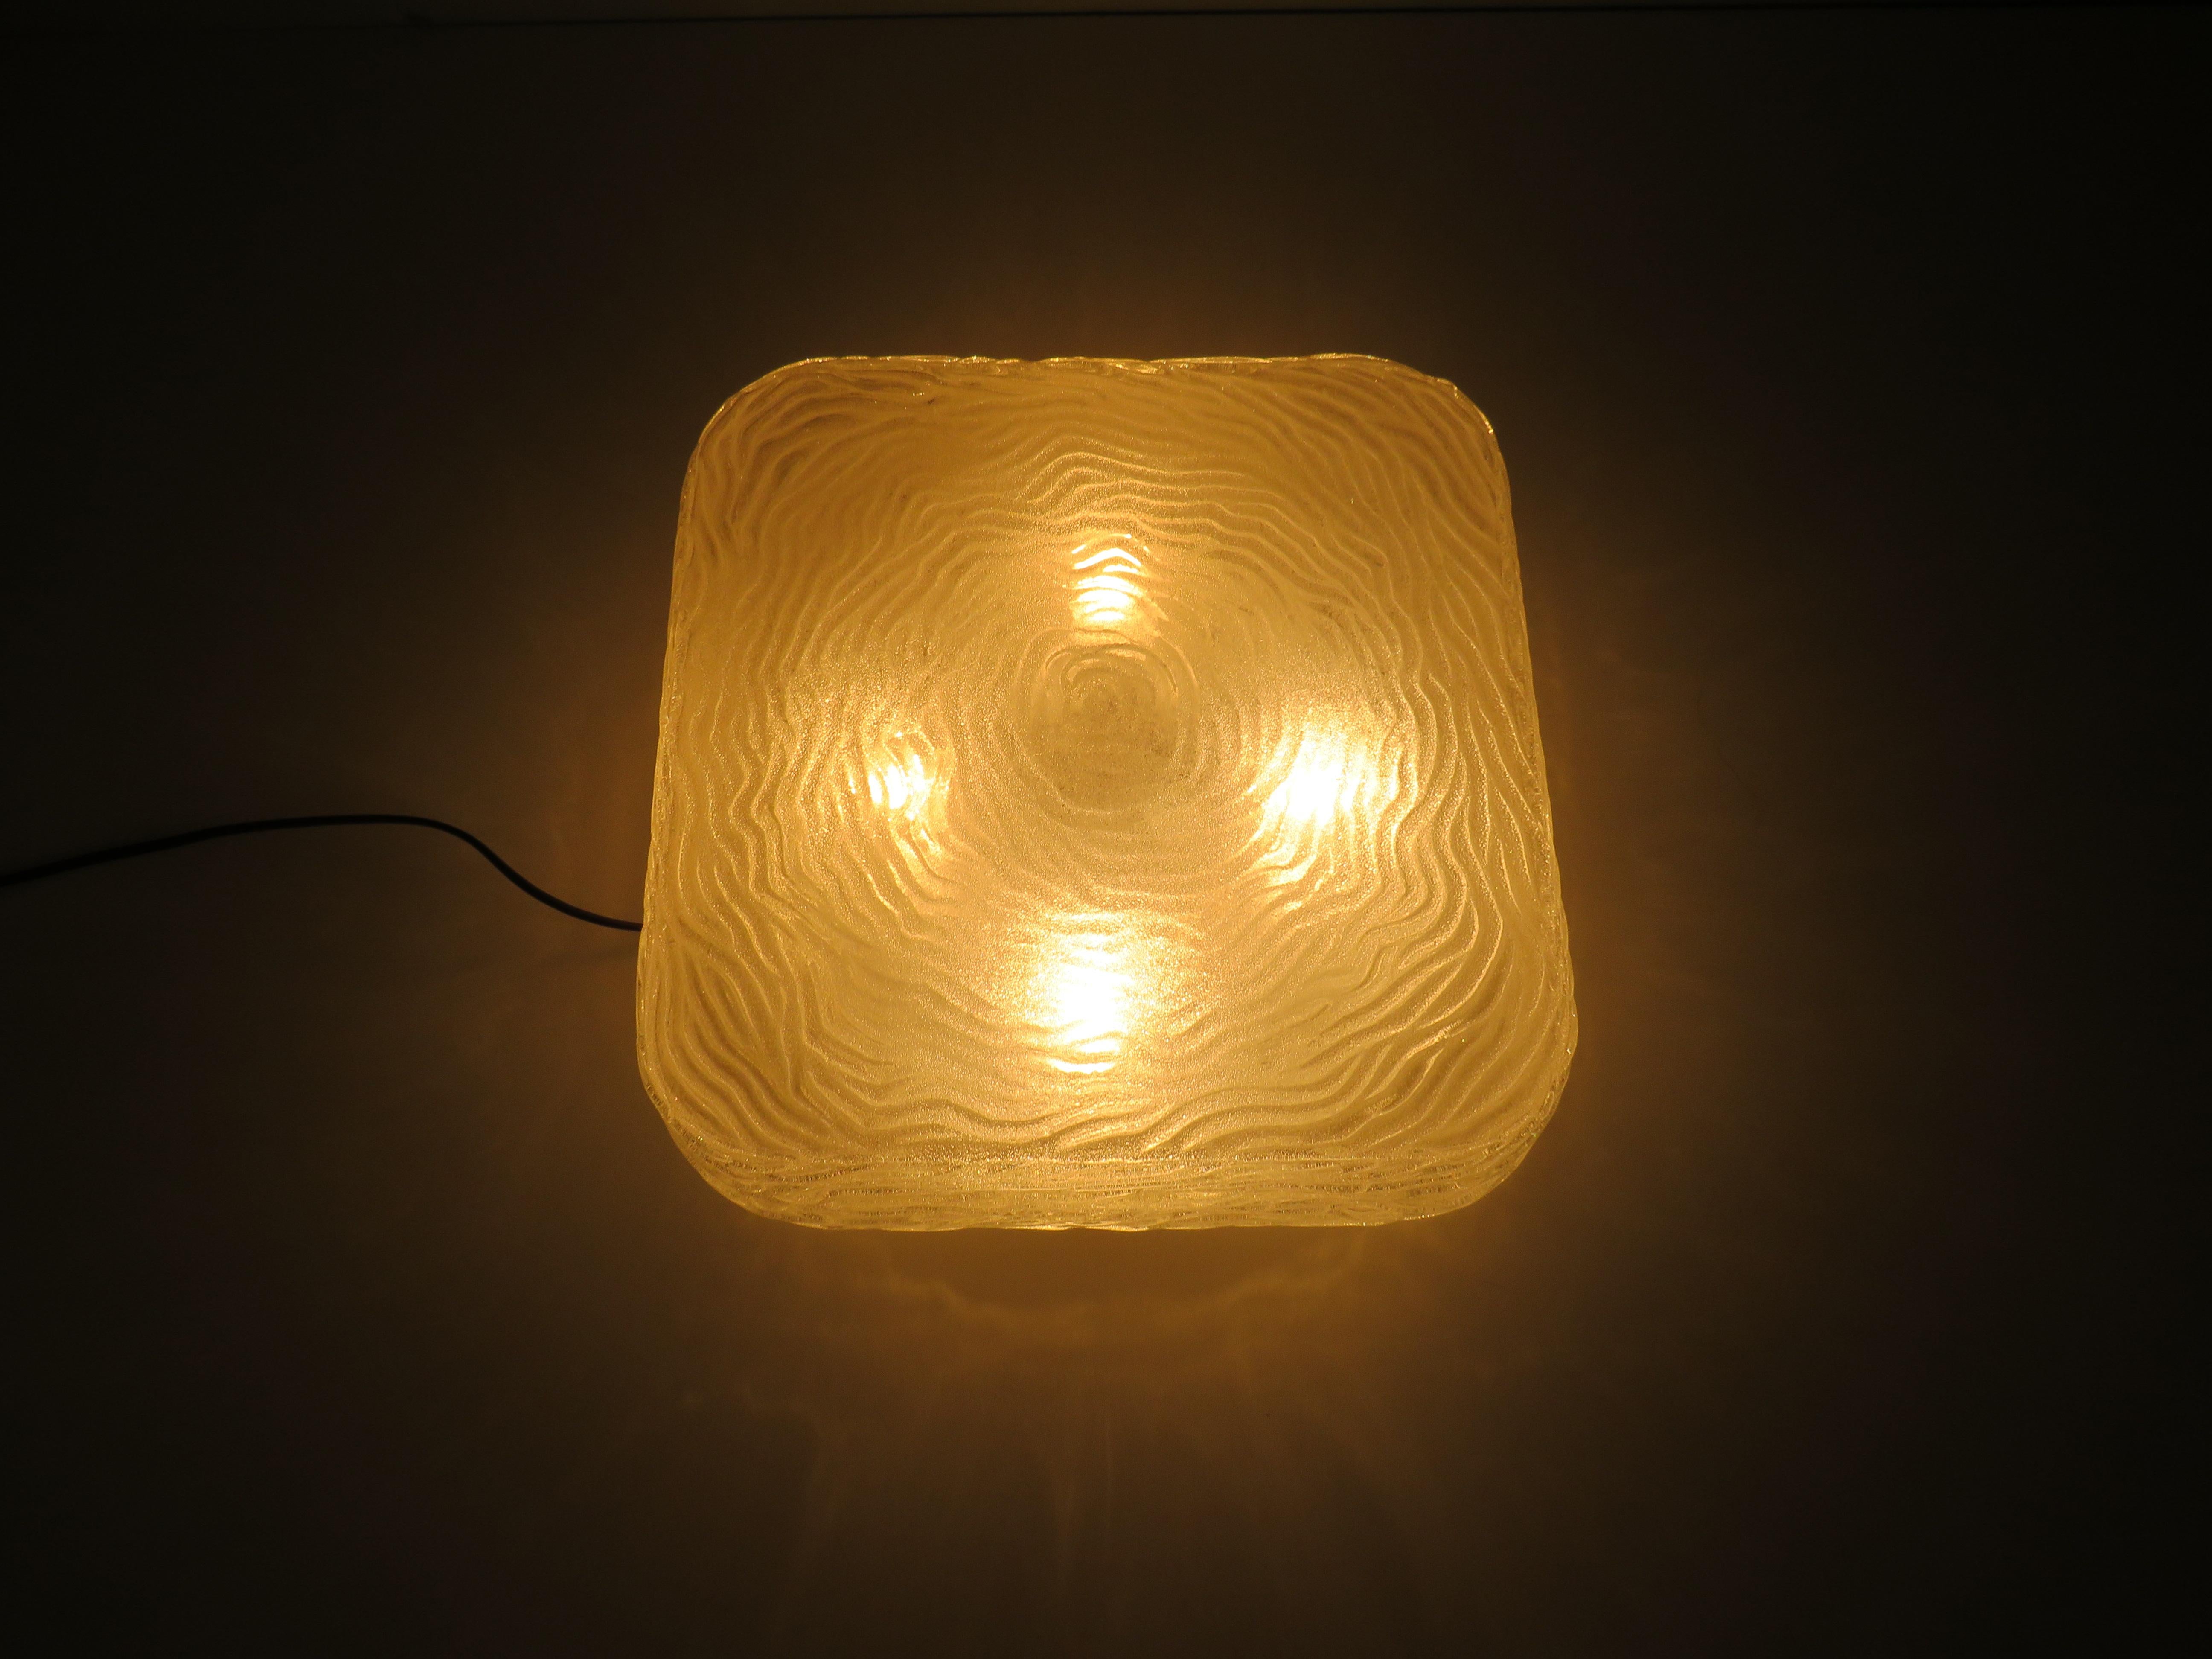 Extra large flush mount or wall lamp made of thick glass with a fingerprint motif and an ice glass effect.
The ceiling lamp has a square shape with rounded corners and is 37 by 37 cm wide. The height of the ceiling lamp is 13 cm. The article has a